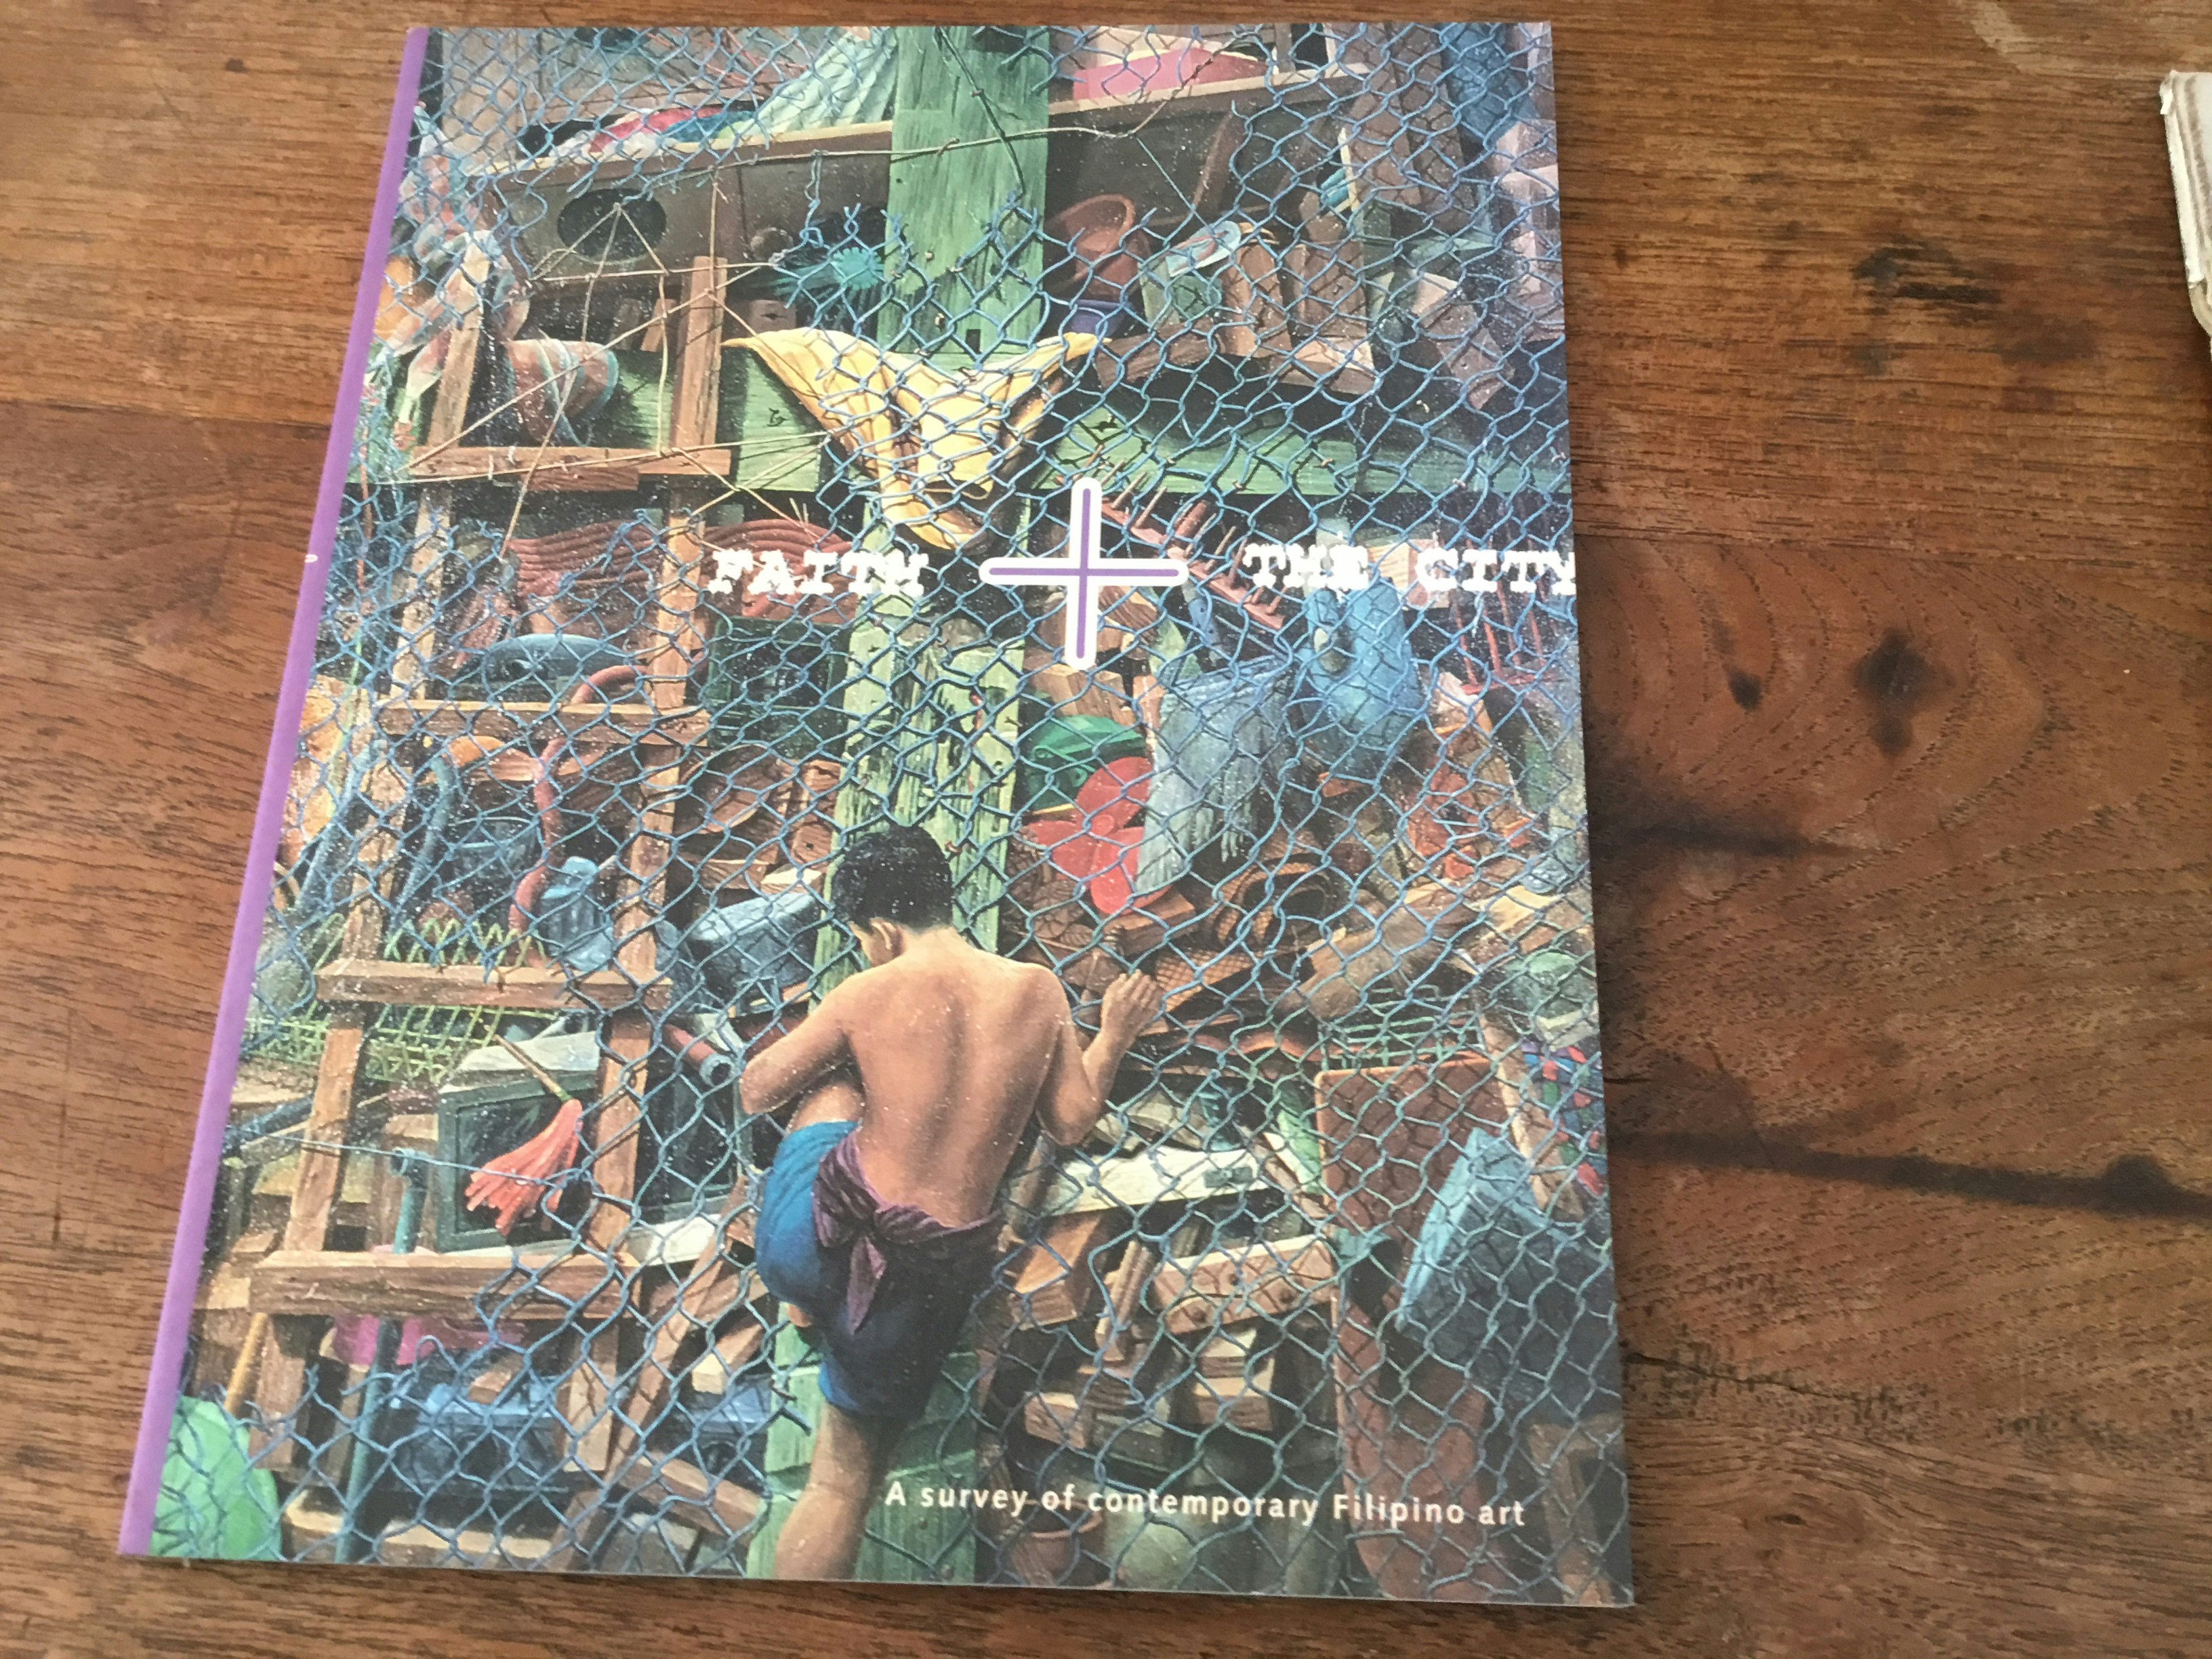 Front cover of a book with a boy climbing a netted fence, title reads 'Faith + The City: A survey of contemporary Filipino art'